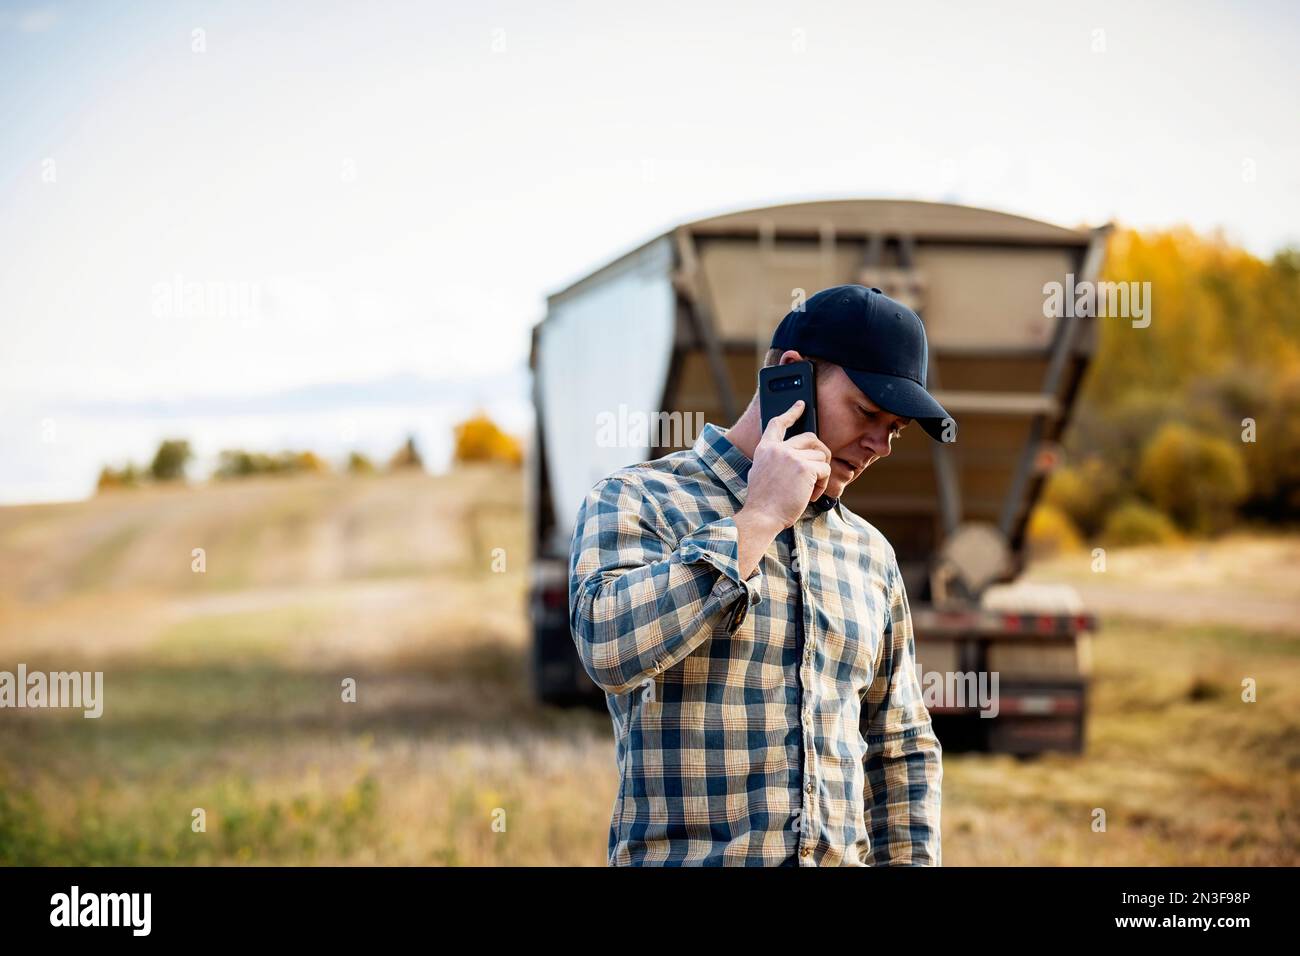 A man talking on a smart phone while monitoring and completing fall canola harvest and checking his load of canola in a grain hauler in the background Stock Photo